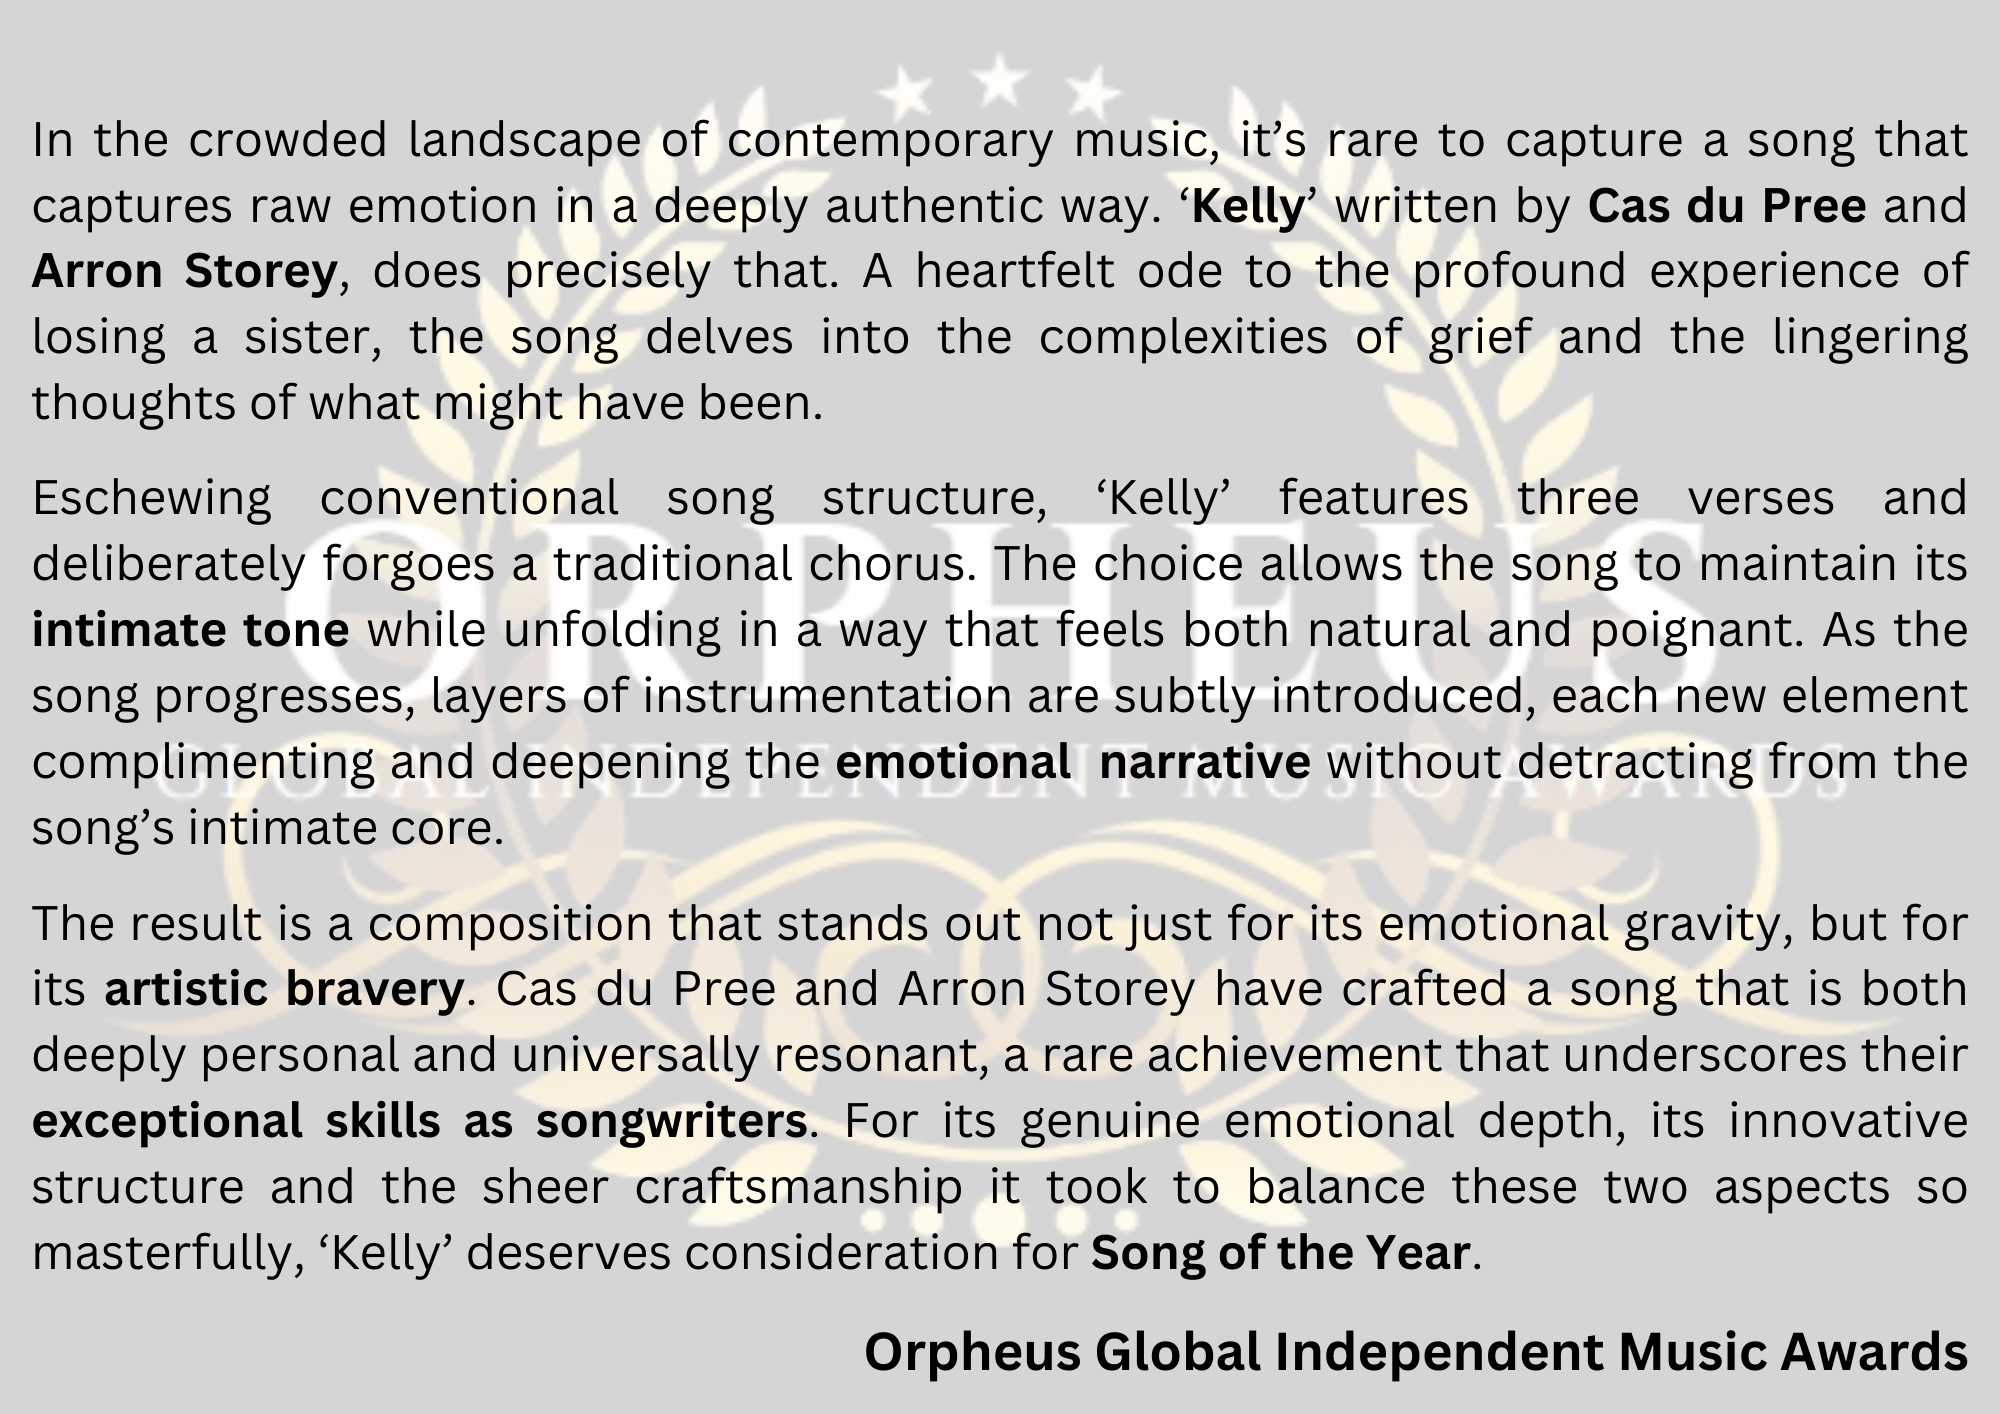 Orpheus Song of the Year Nominee - Kelly by Cas du Pree. Produced by Arron Storey